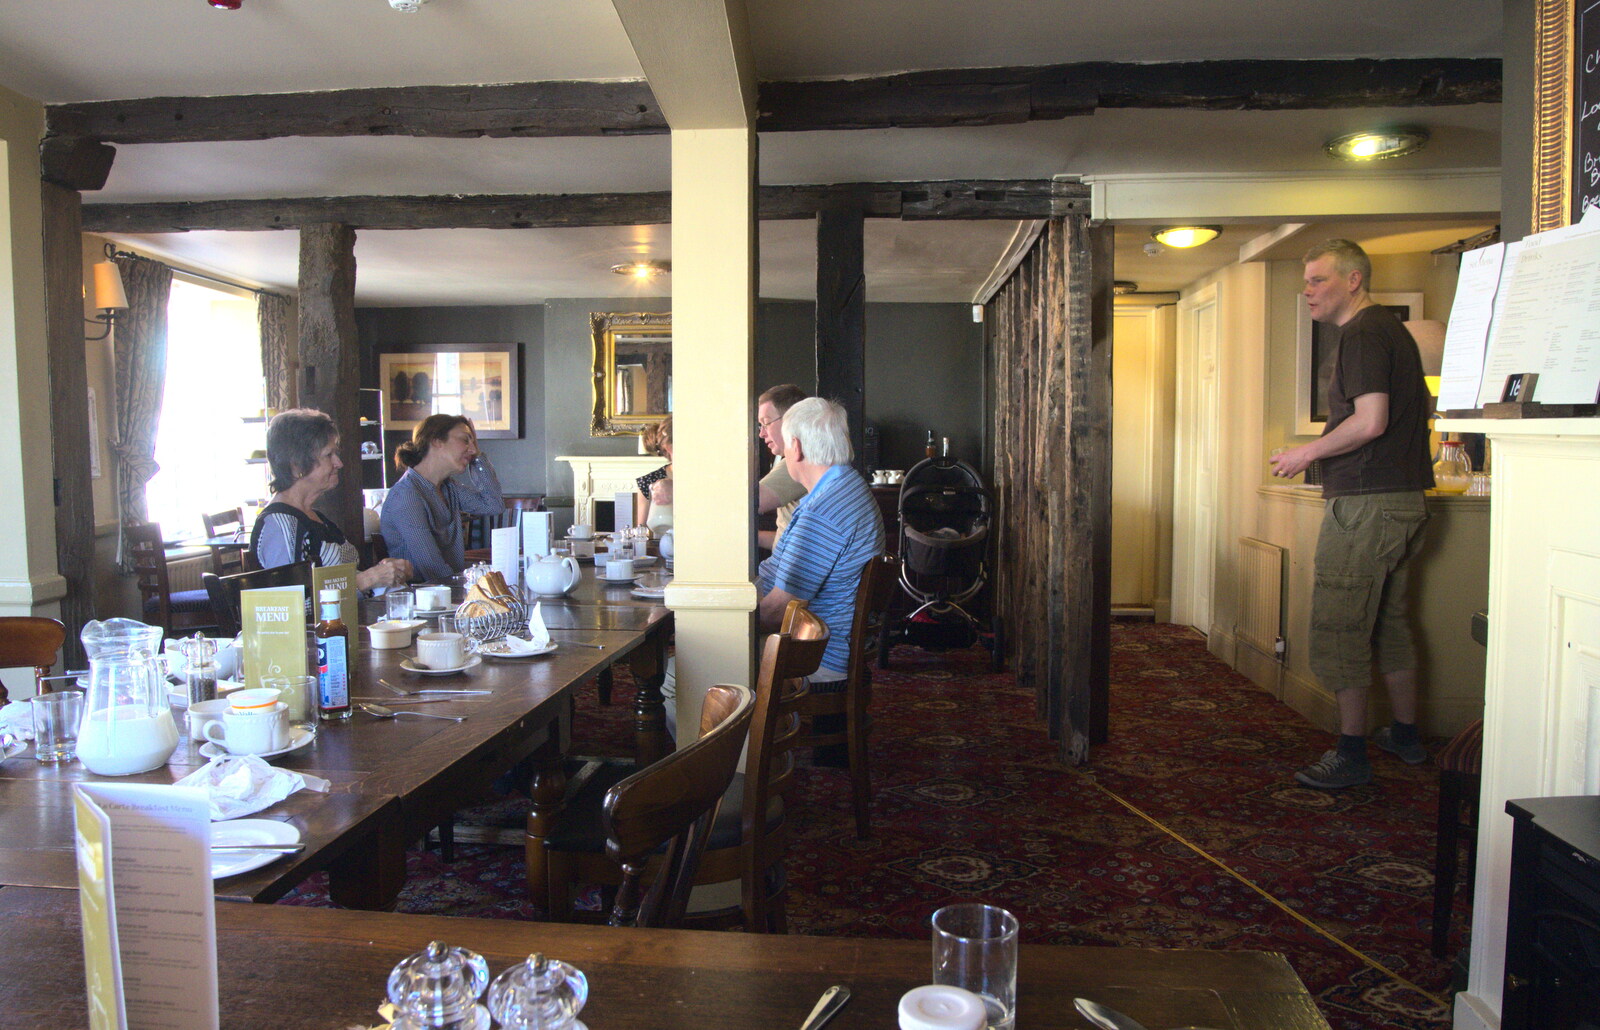 It's breakfast time in the restaurant from The BSCC Cycling Weekend, The Swan Inn, Thaxted, Essex - 12th May 2012